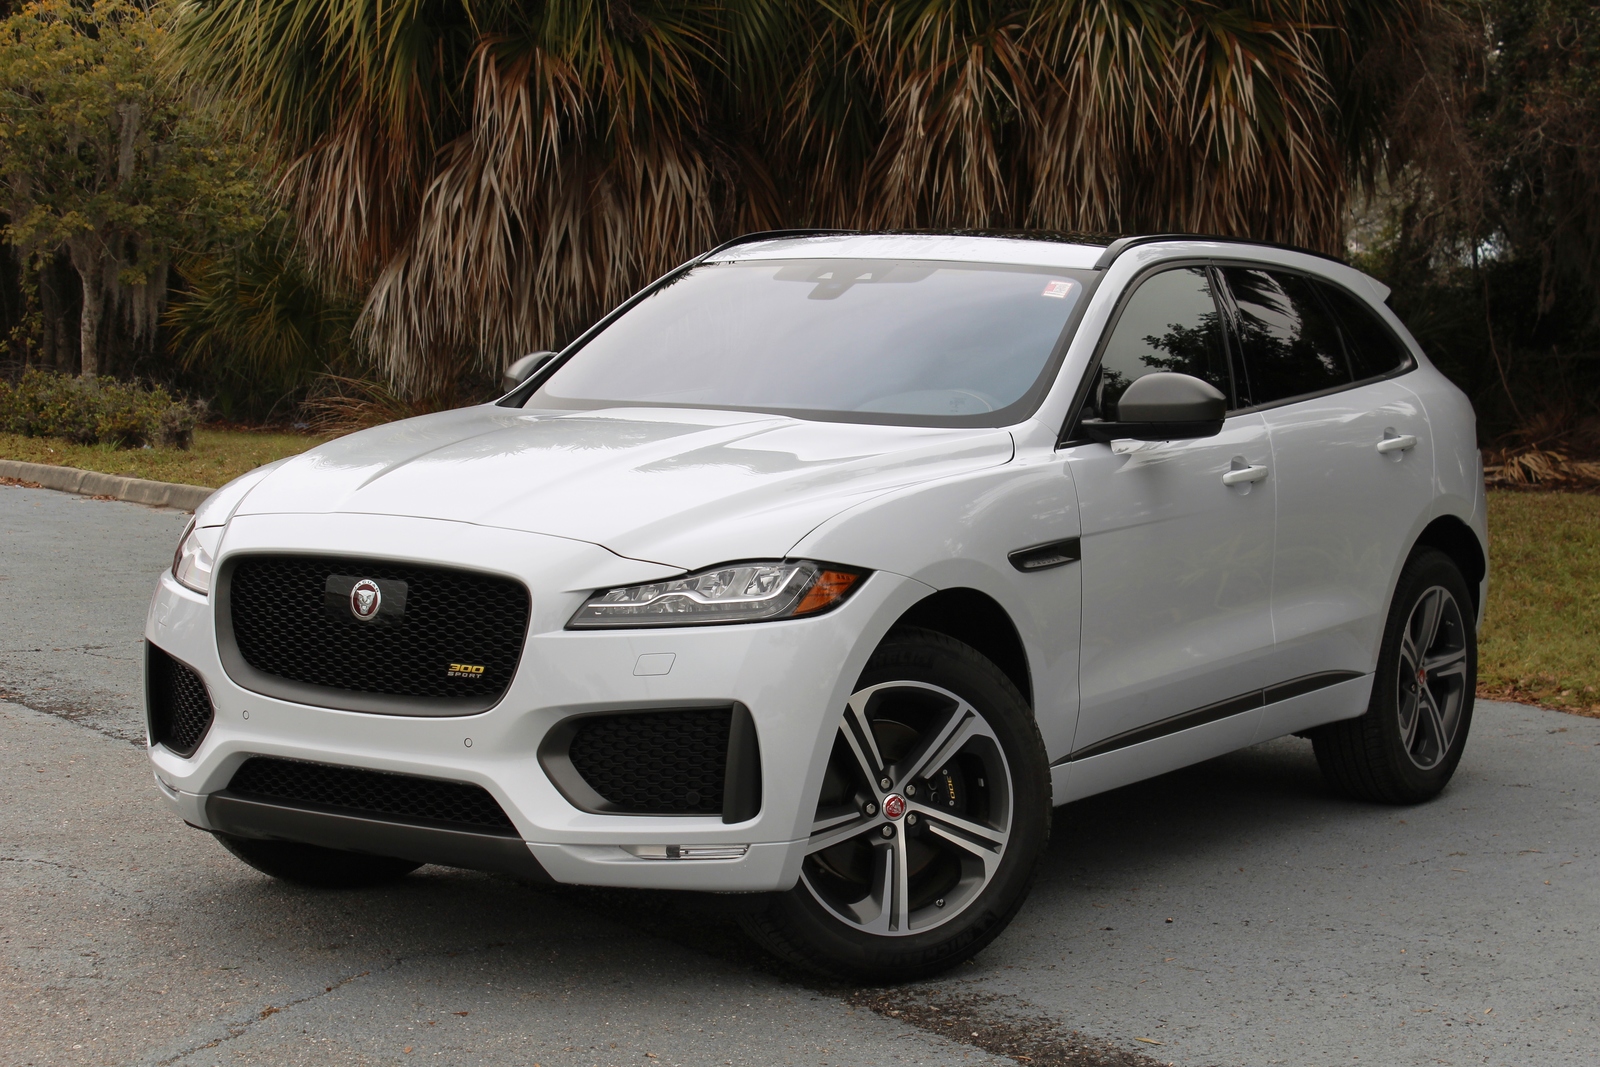 Pre-Owned 2020 Jaguar F-PACE 300 Sport Limited Edition ...